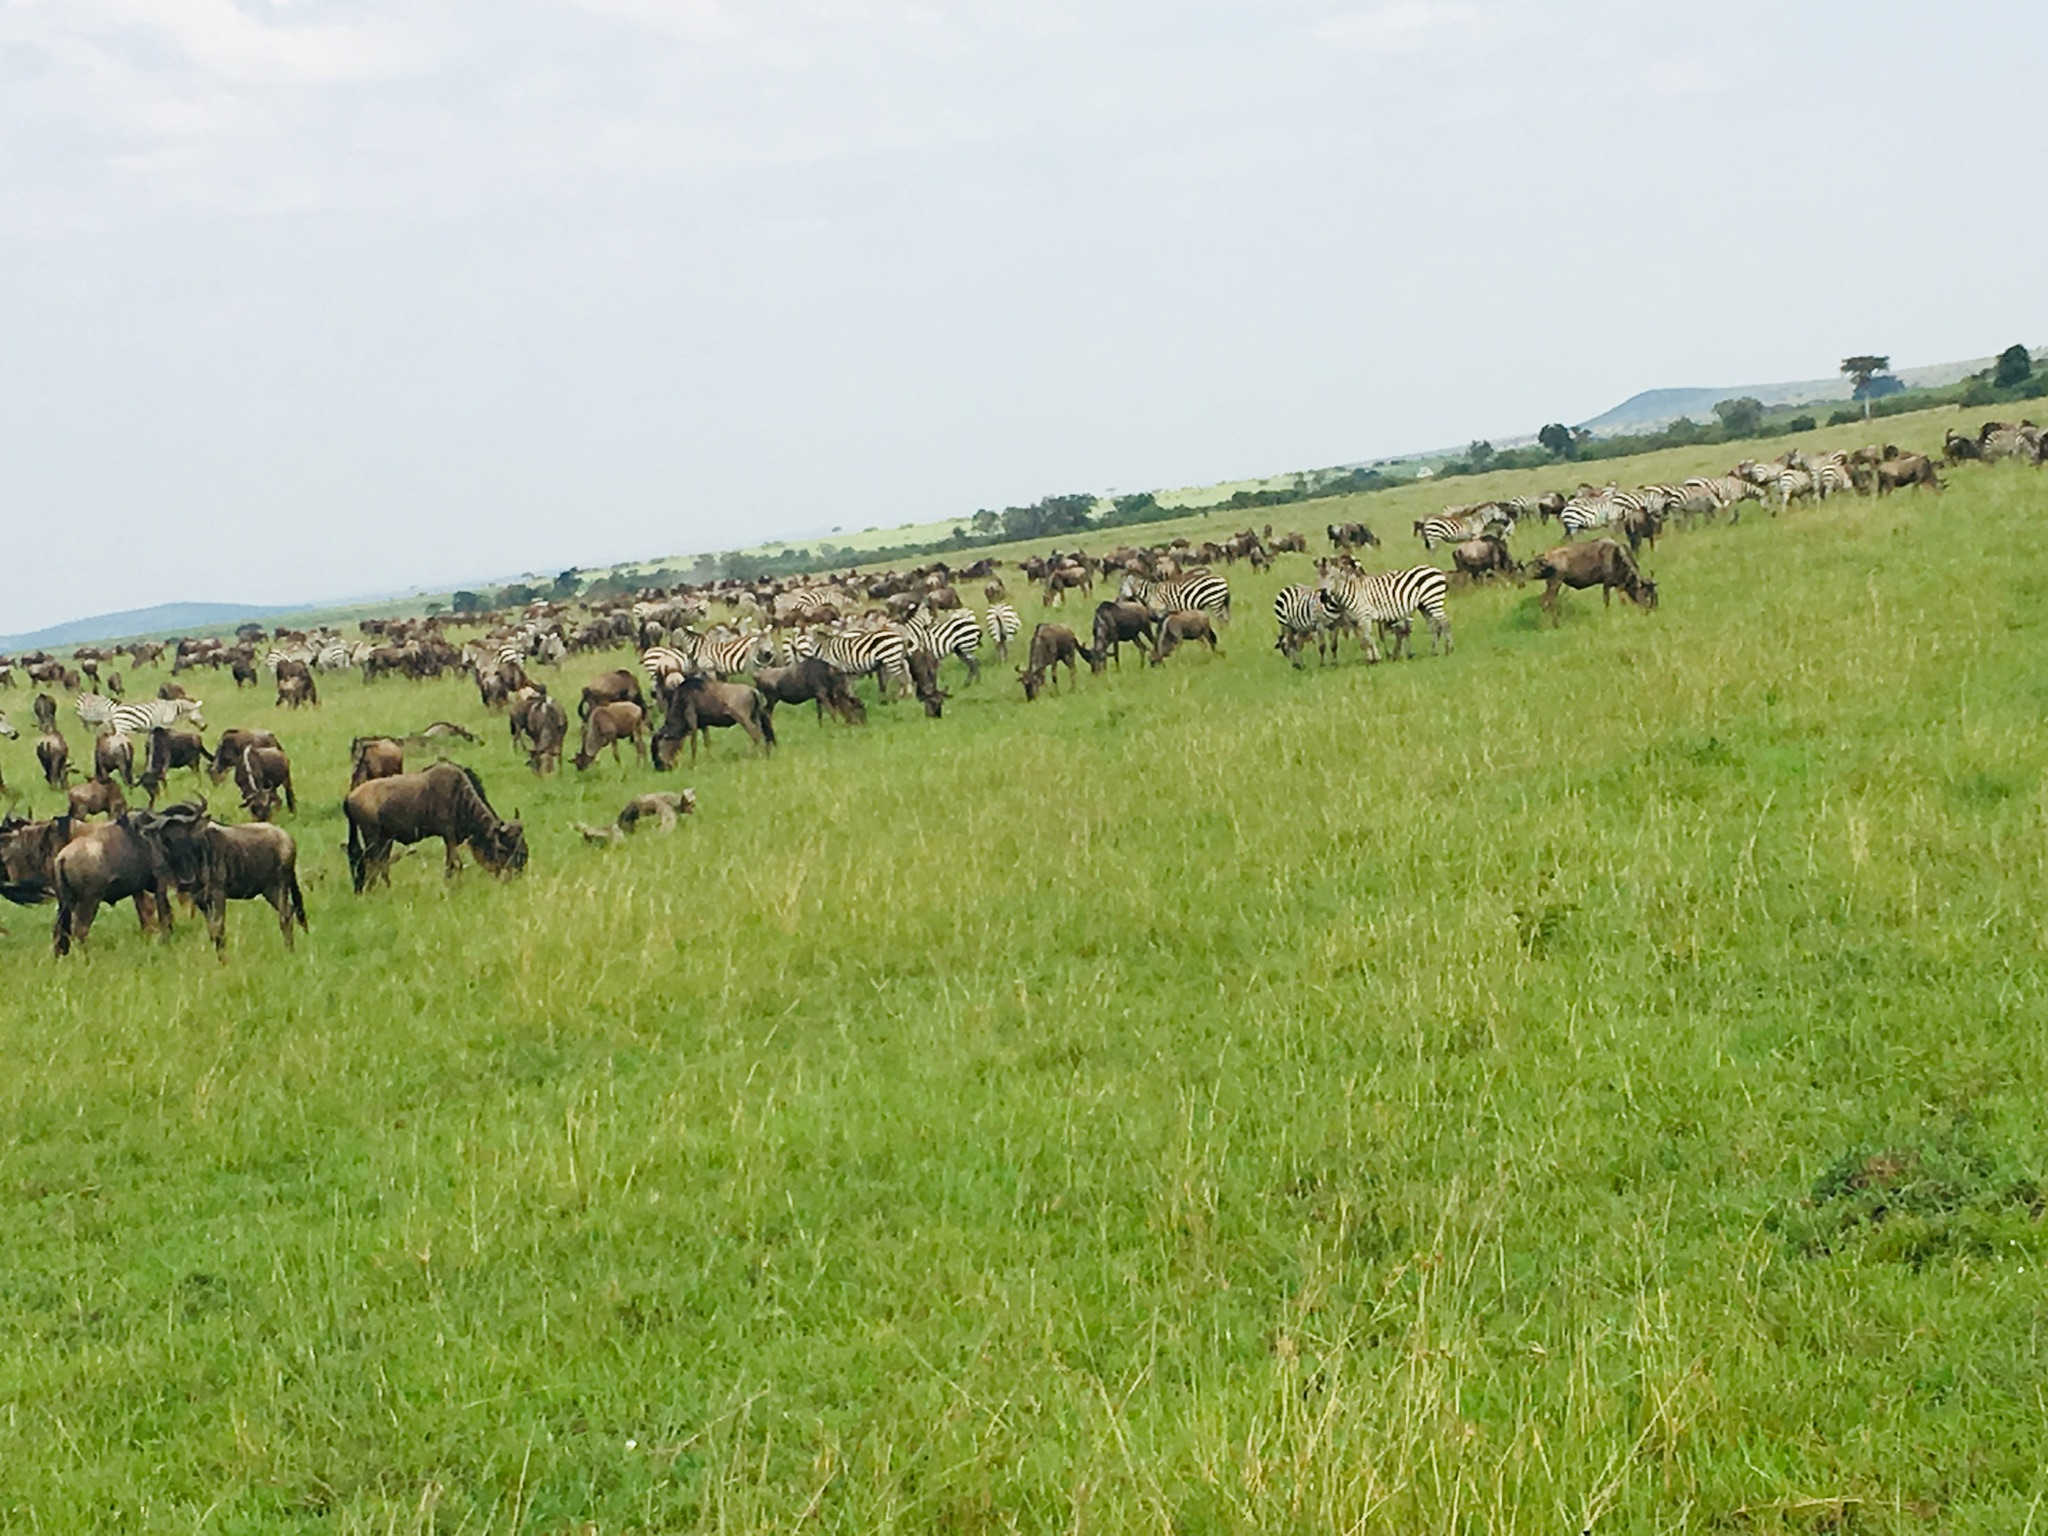 WHAT A TRAGEDY; more than 300 wildebeest drown in the mara. – connecting  with Mother Nature 🌻